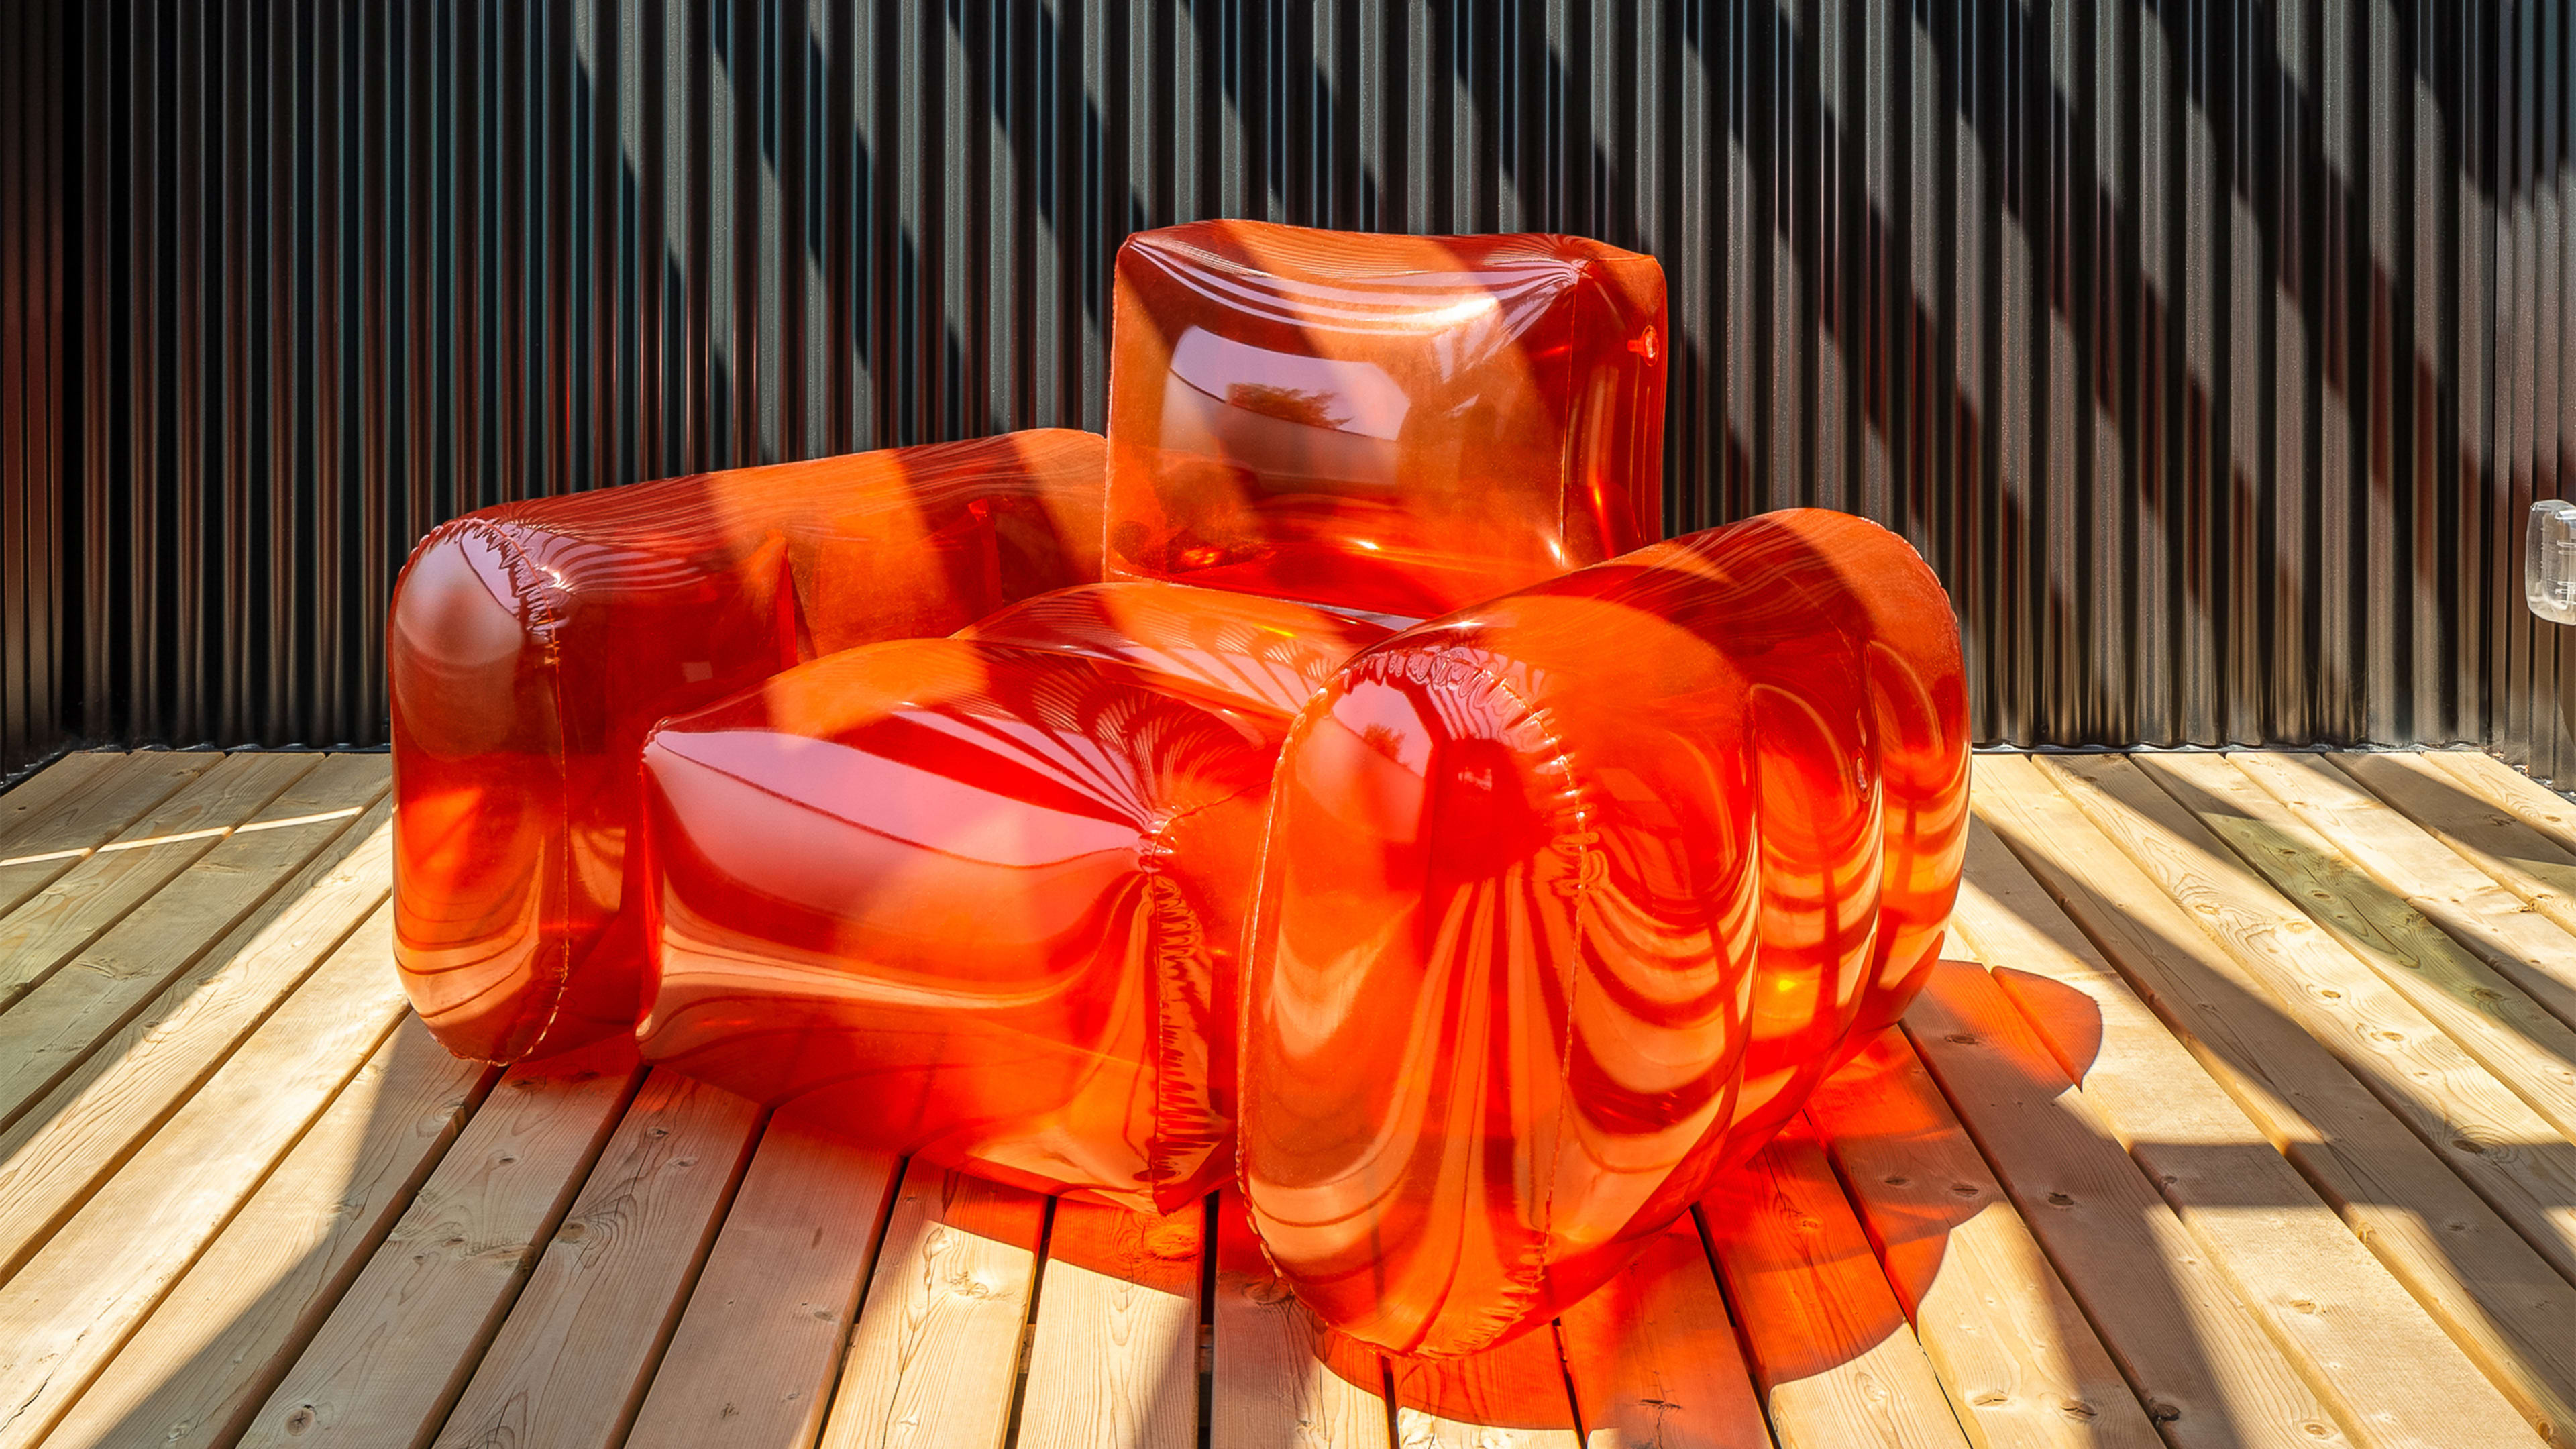 Inflatable furniture is back—this time for adults